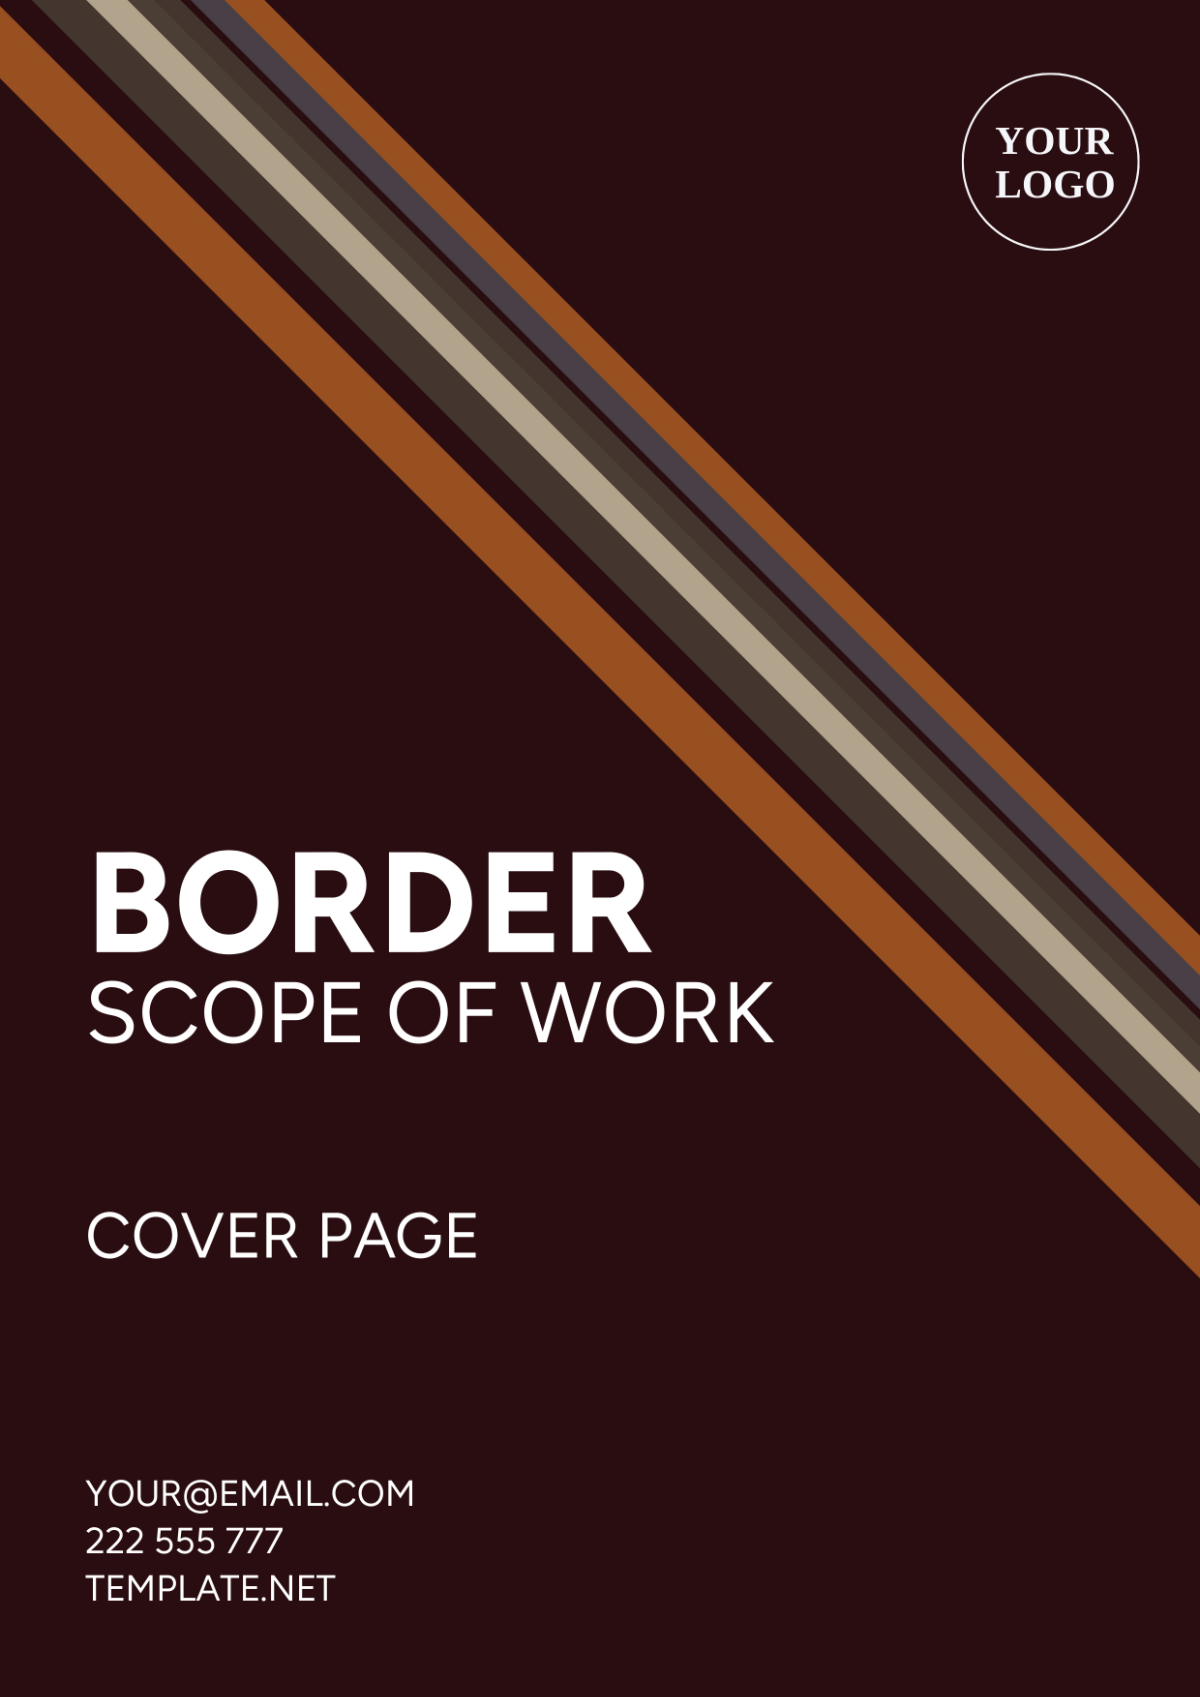 Border Scope of Work Cover Page Template